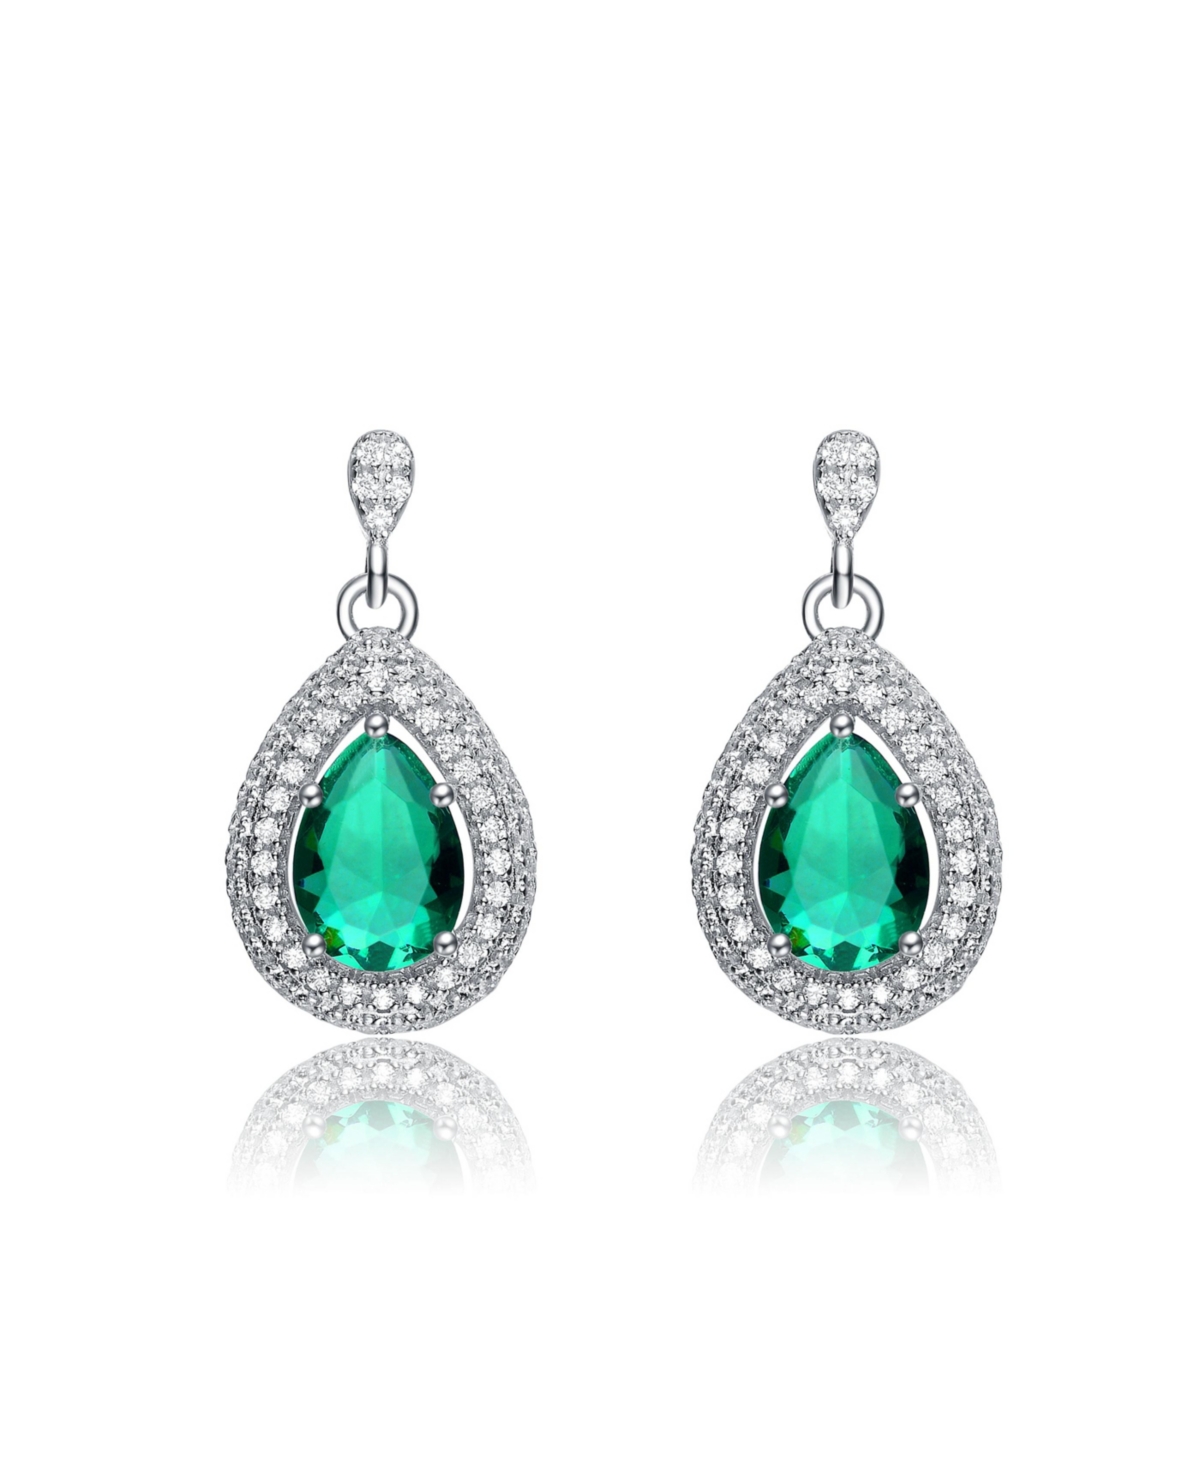 Sterling Silver White Gold Plated Cubic Zirconia Pear Drop Earrings - Dark Green